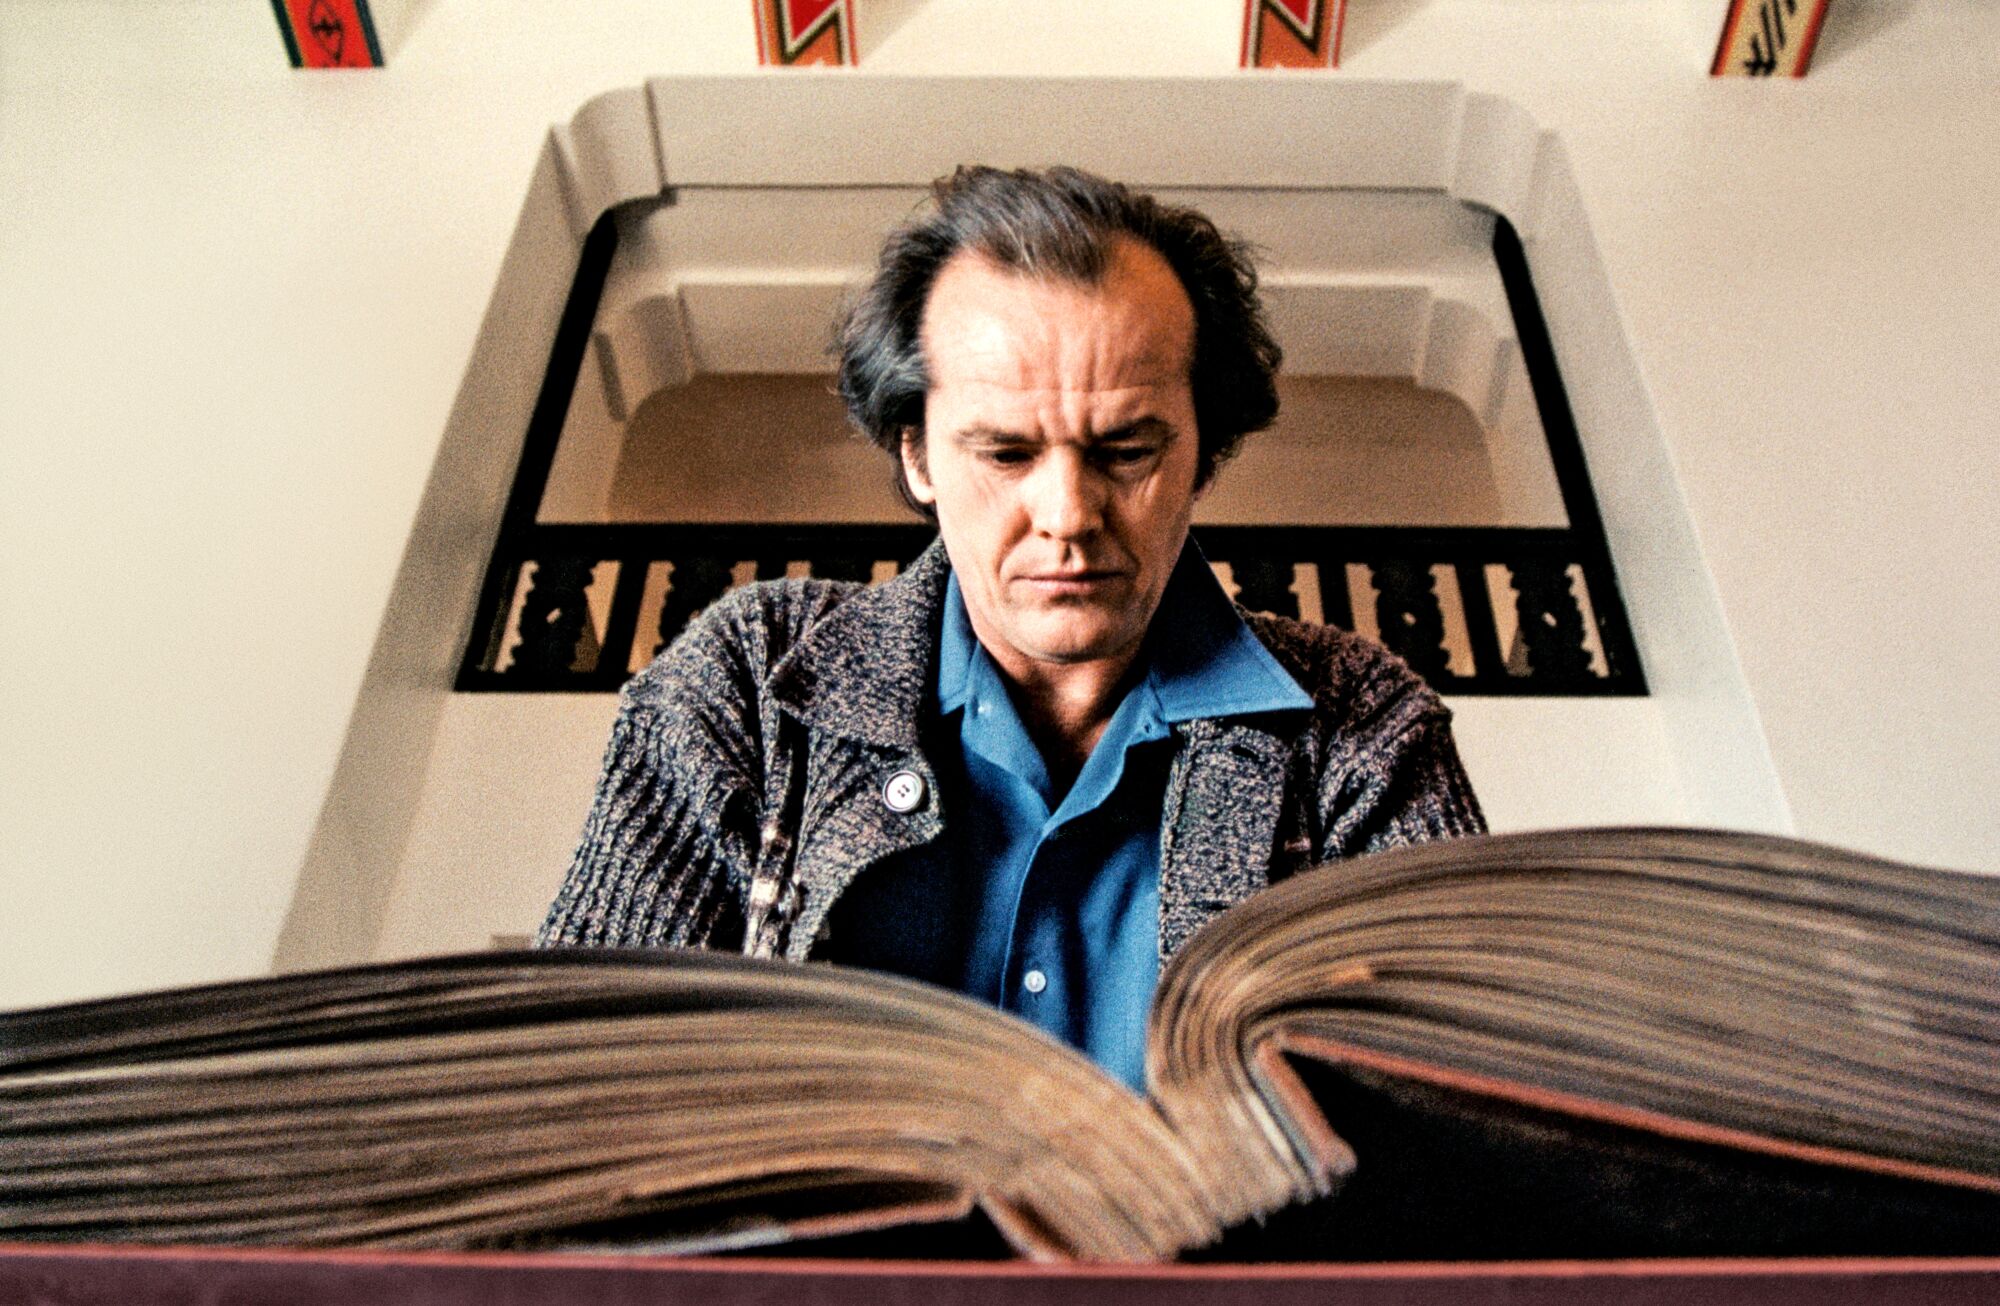 Nicholson is poring over a scrapbook that details the Overlook Hotel’s sordid past in a shot never used in 'The Shining.'